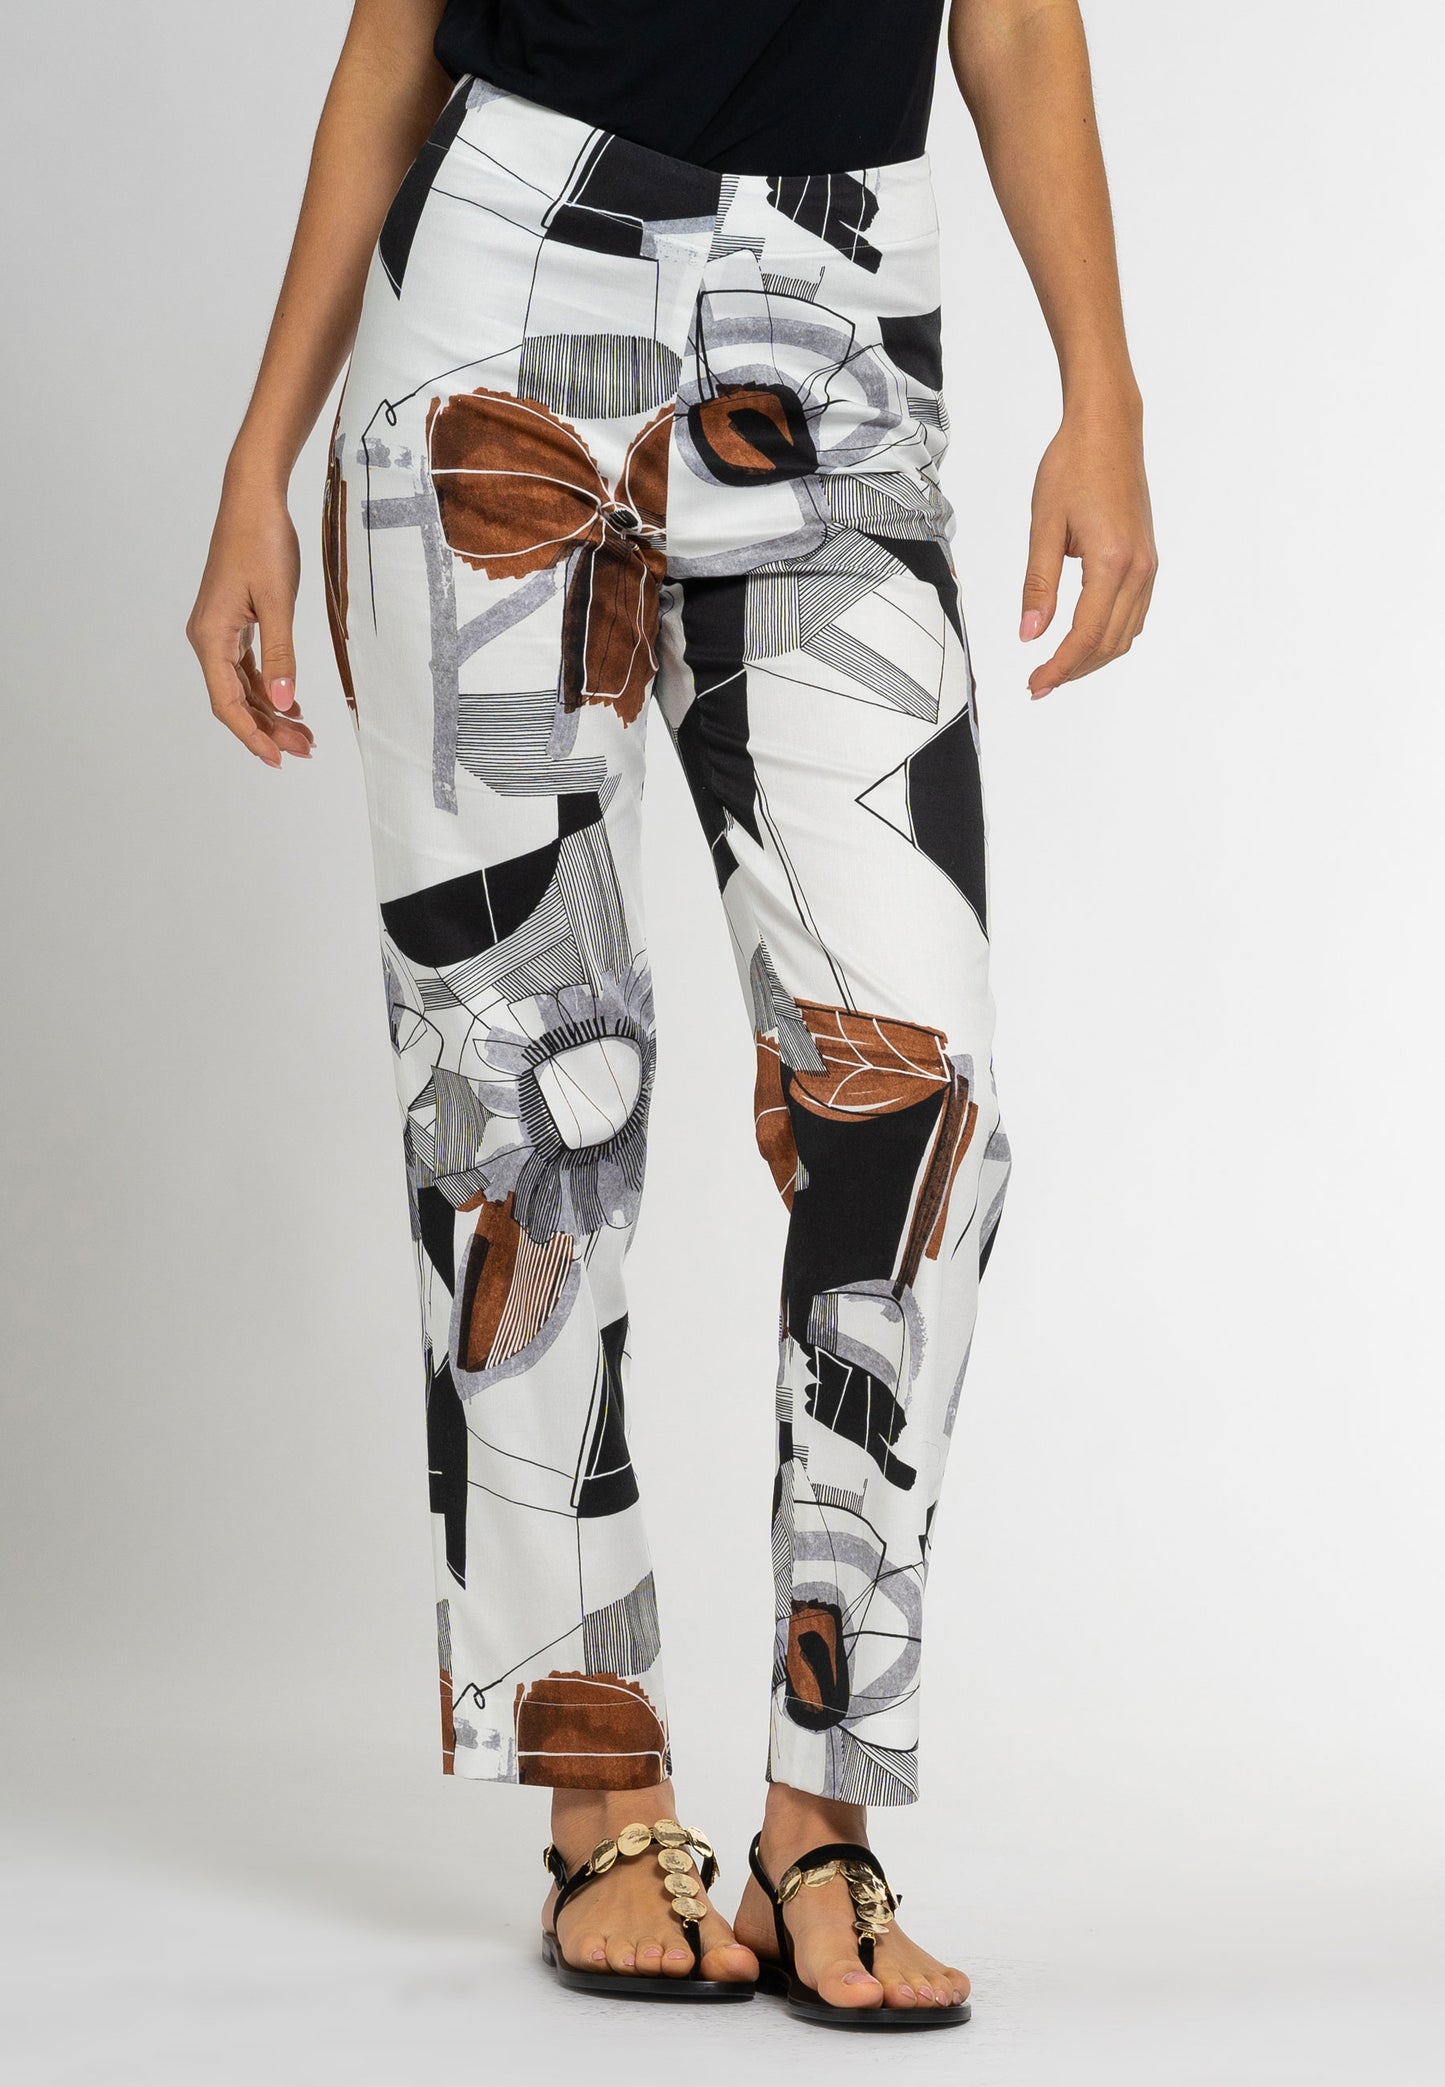 abstract women pants; trousers for women women's trousers, pants, female pants, designer pants, women's trousers onlinetrousers, women's trousers, trousers for women, green trousers, organic cotton trousers, sustainable fashion